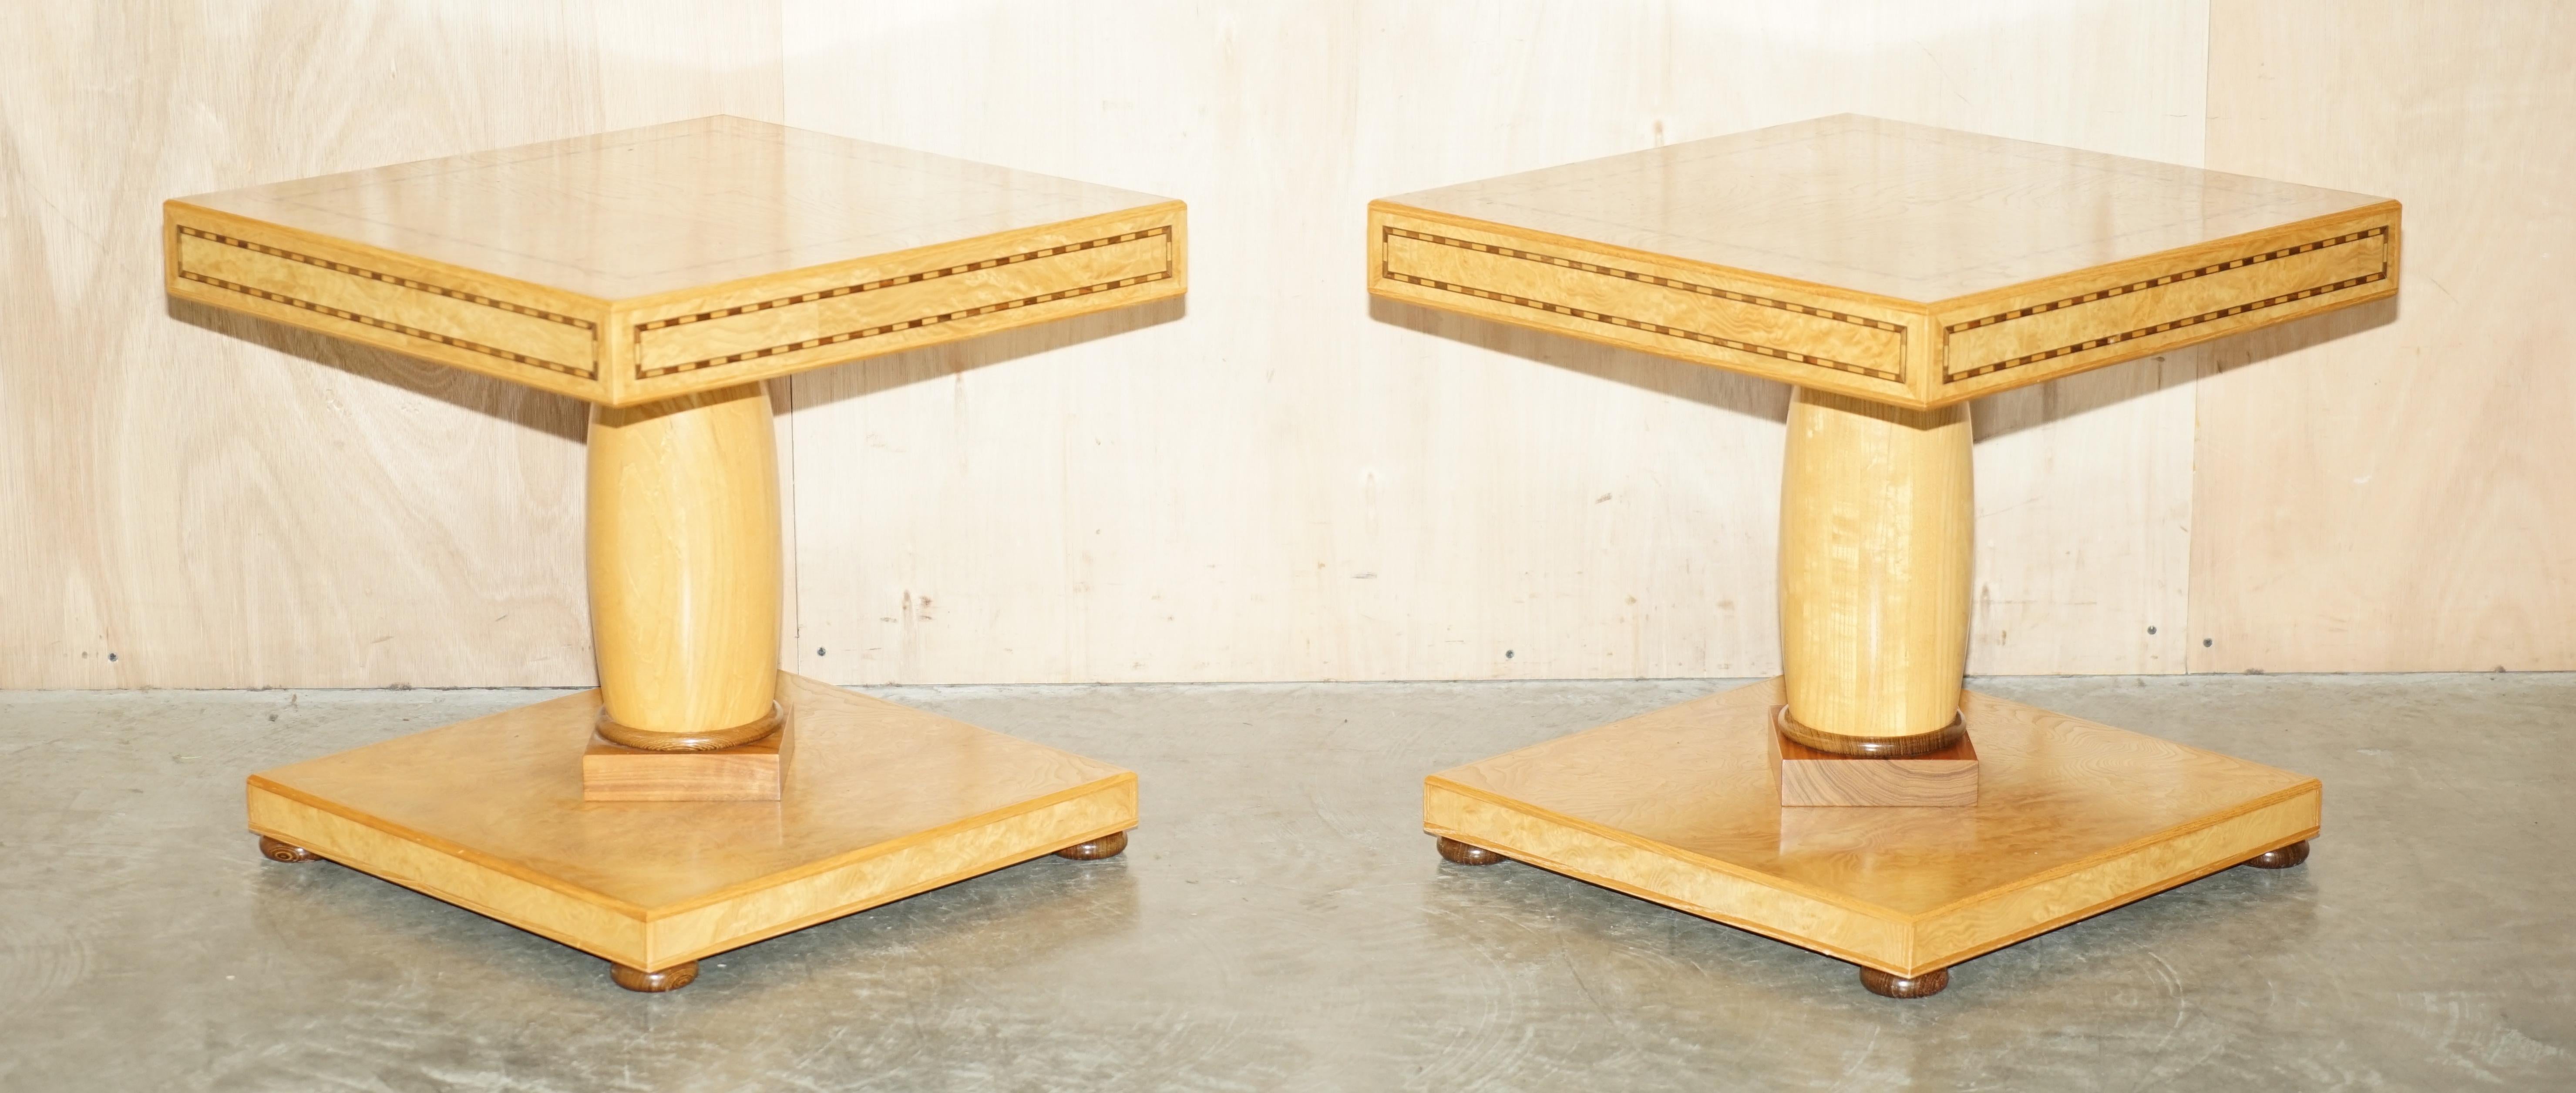 We are delighted to offer for sale this sublime pair of designer Andrew Varah Burr Walnut, Satinwood & Oak oversized side end tables which are part of a suite

I have in total a huge dining table, an oversized coffee table, a console table, a pair